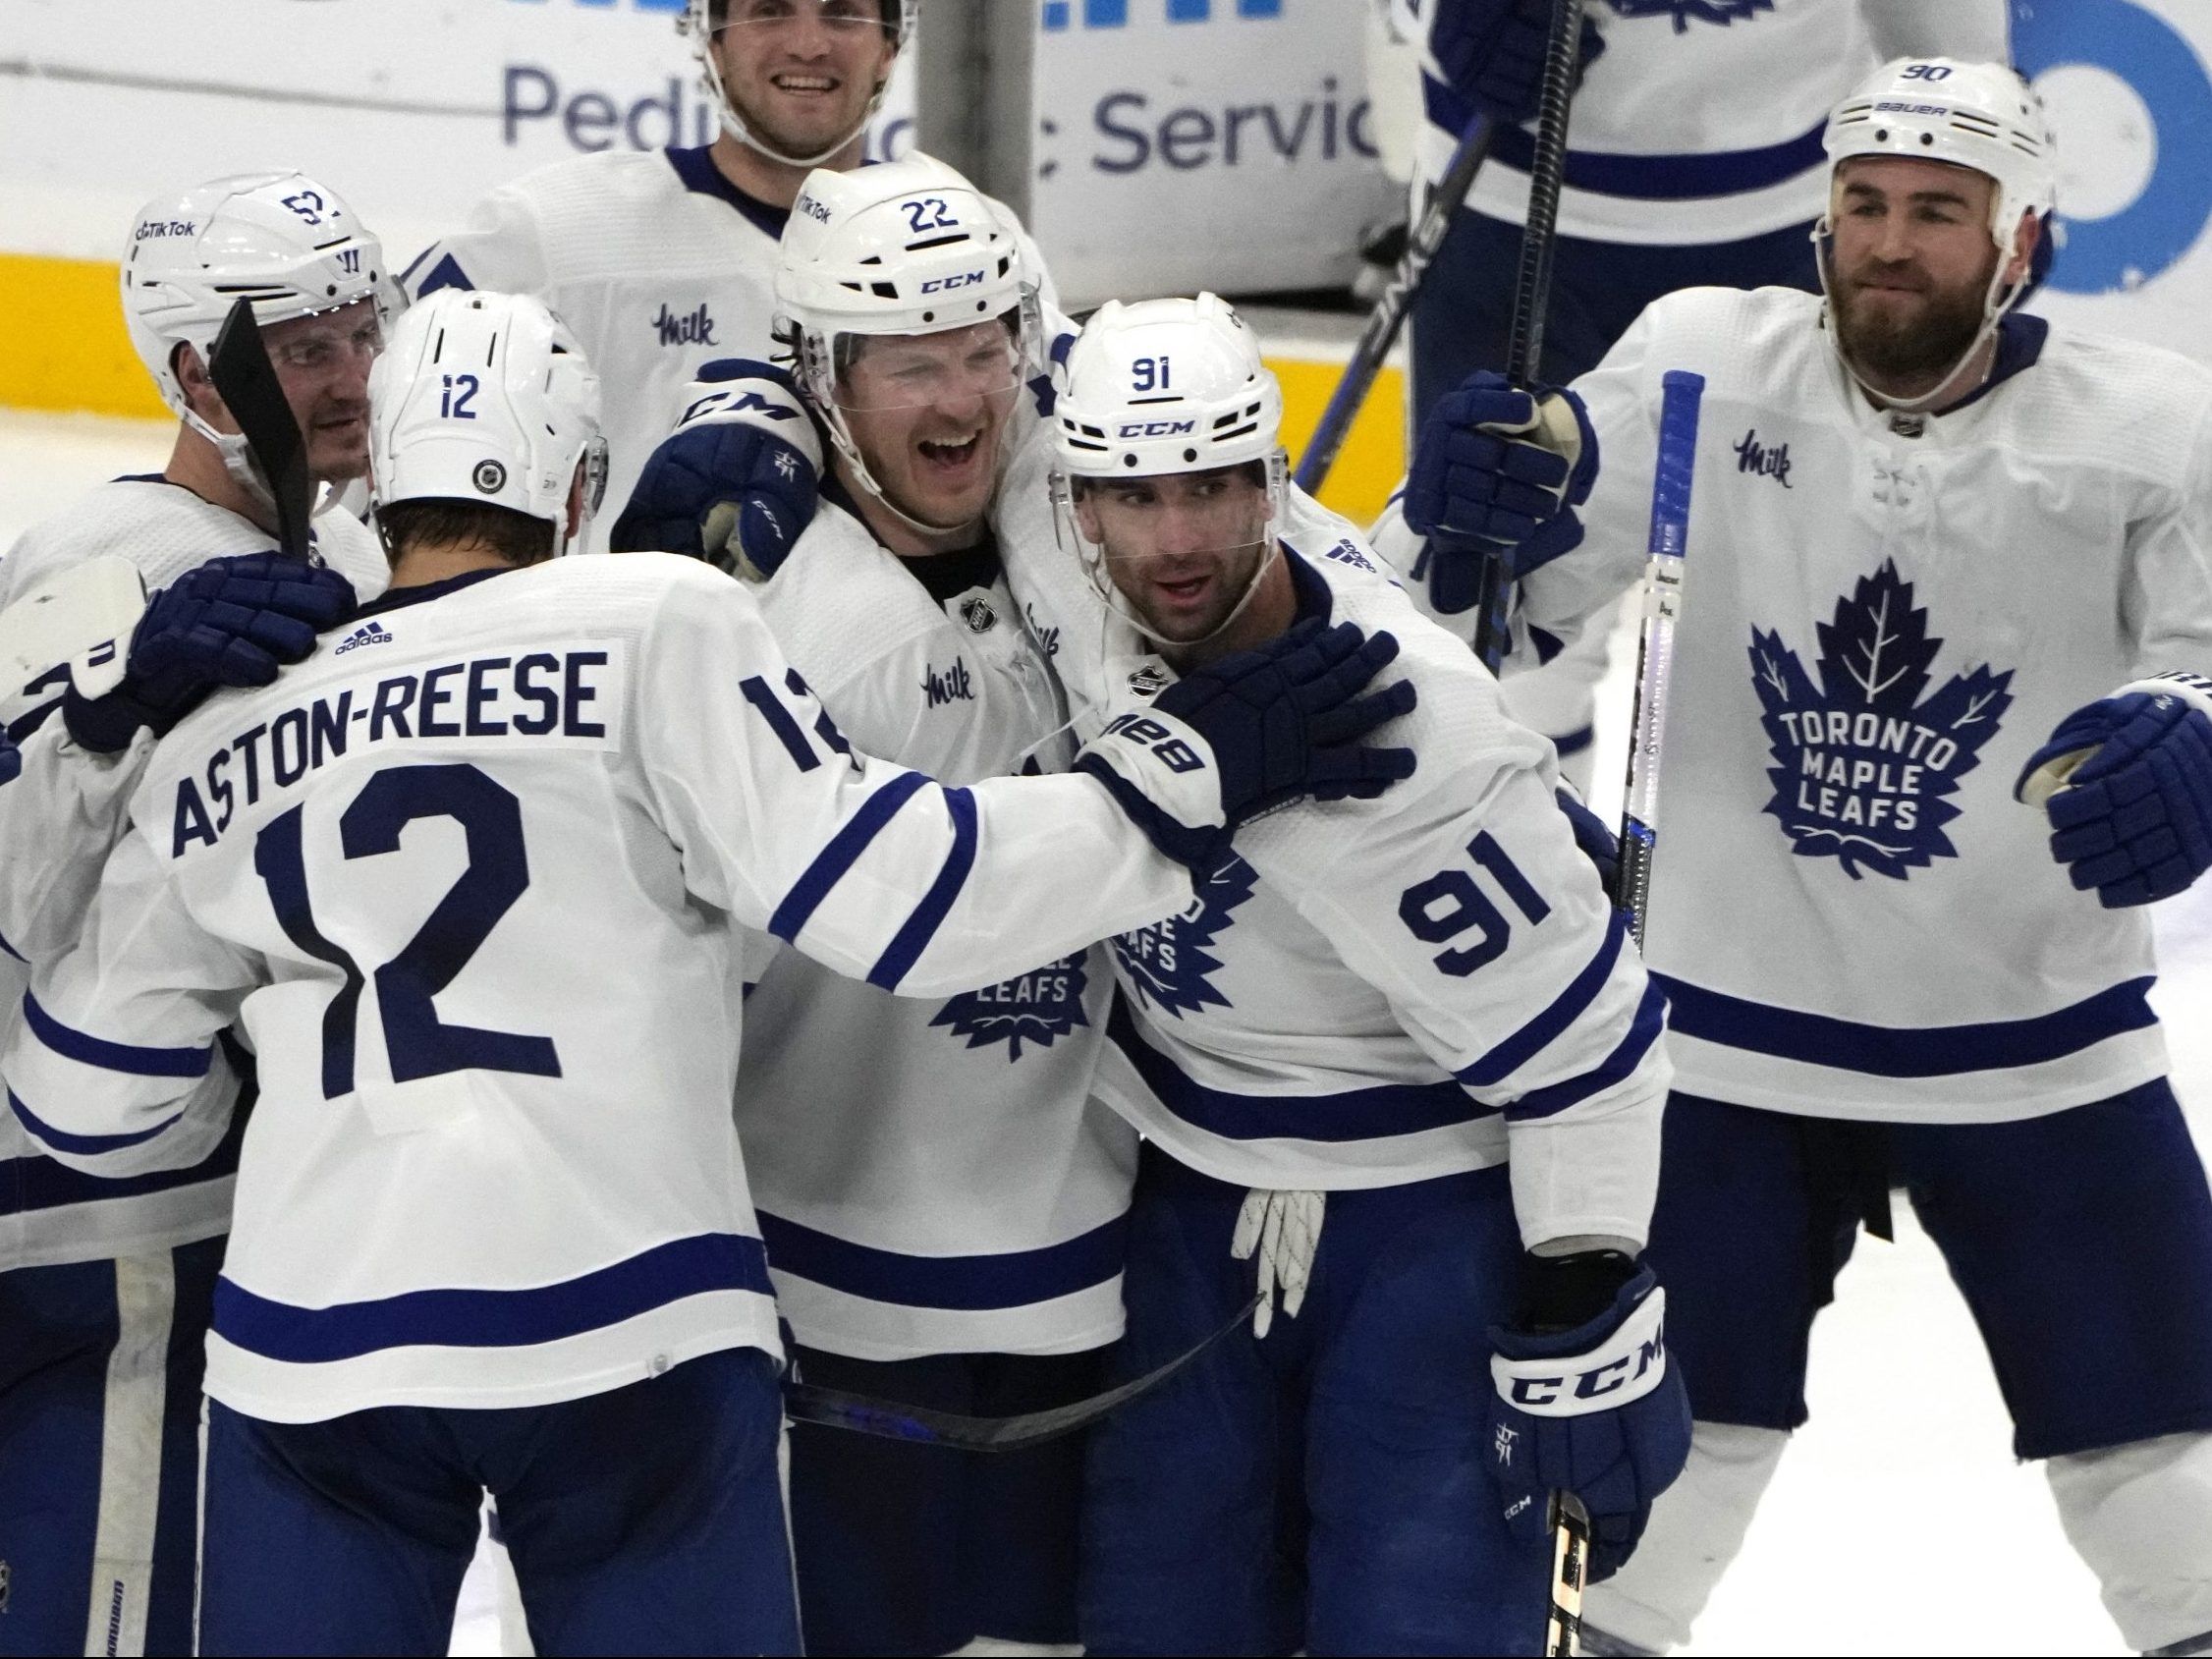 Matthew Knies starts with an overtime win as Maple Leafs top Panthers Toronto